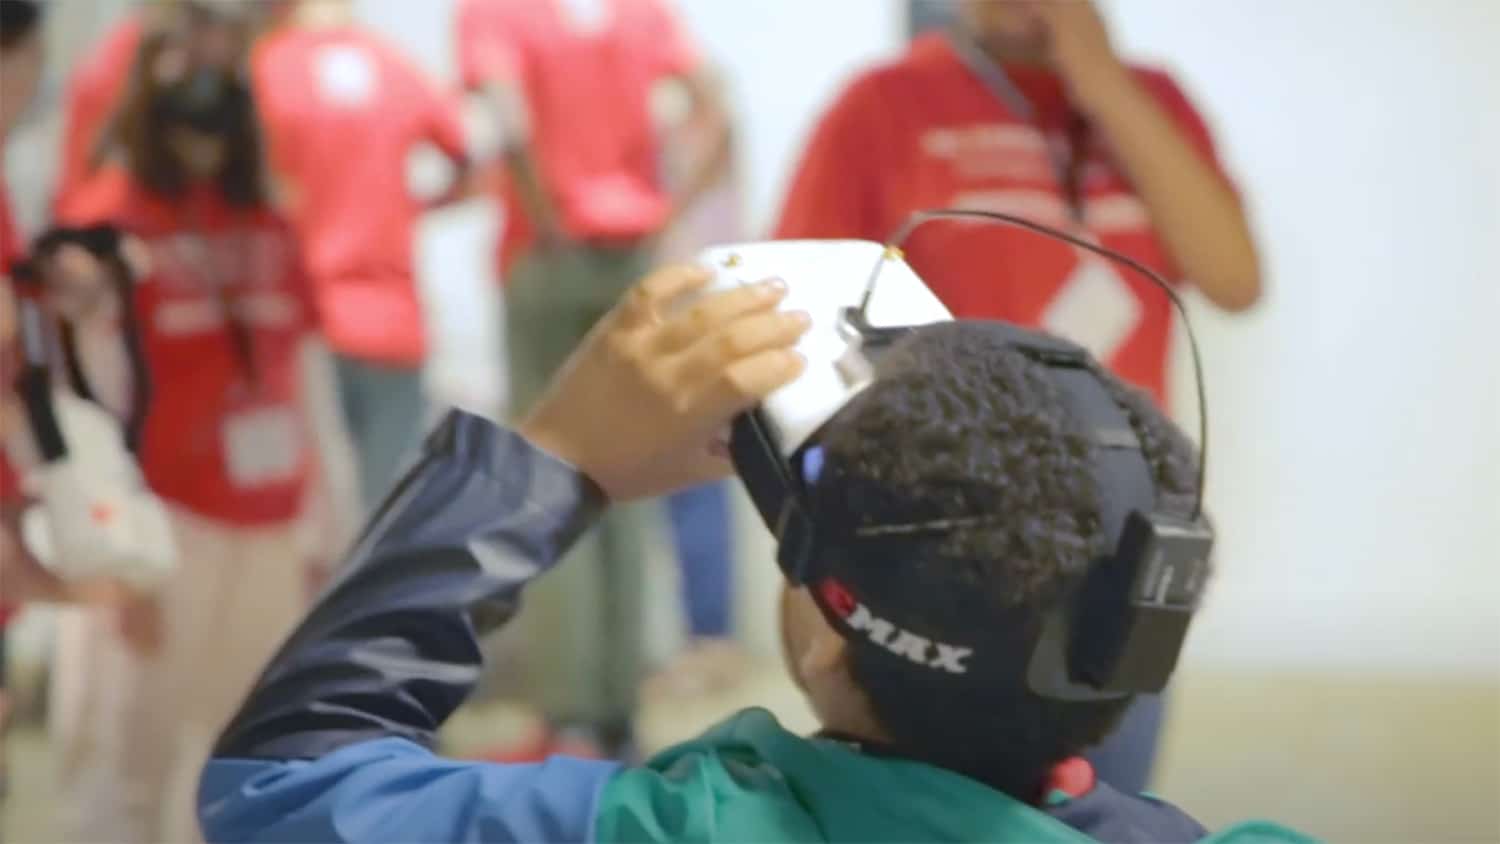 A young boy wears virtual reality goggles at an Imhotep Academy event